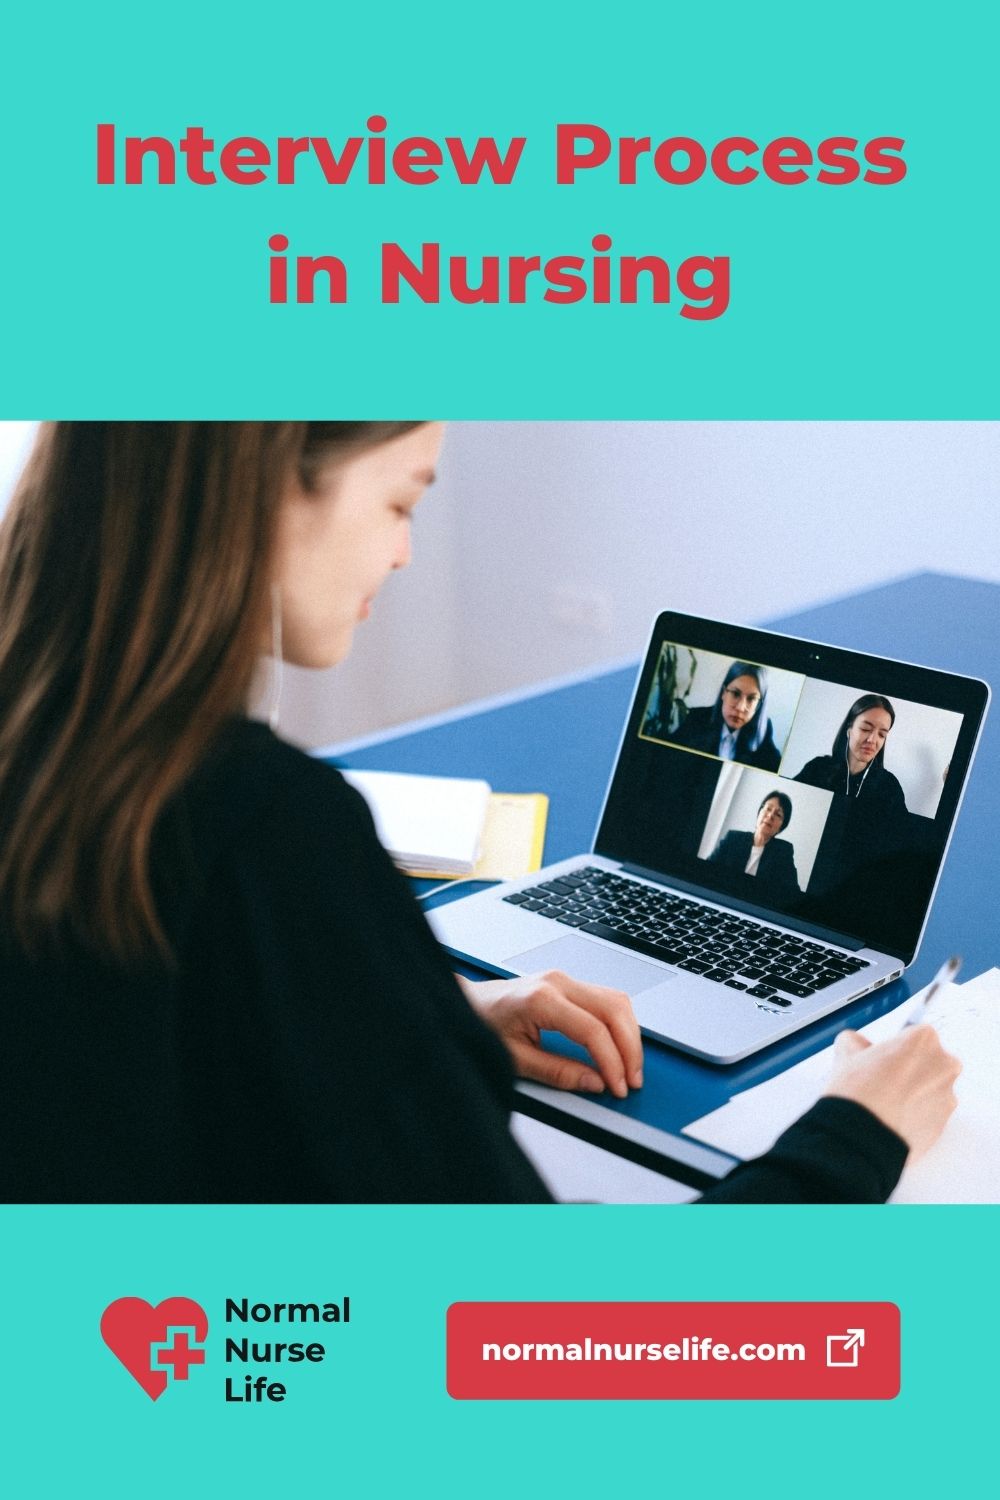 The interview process in nursing